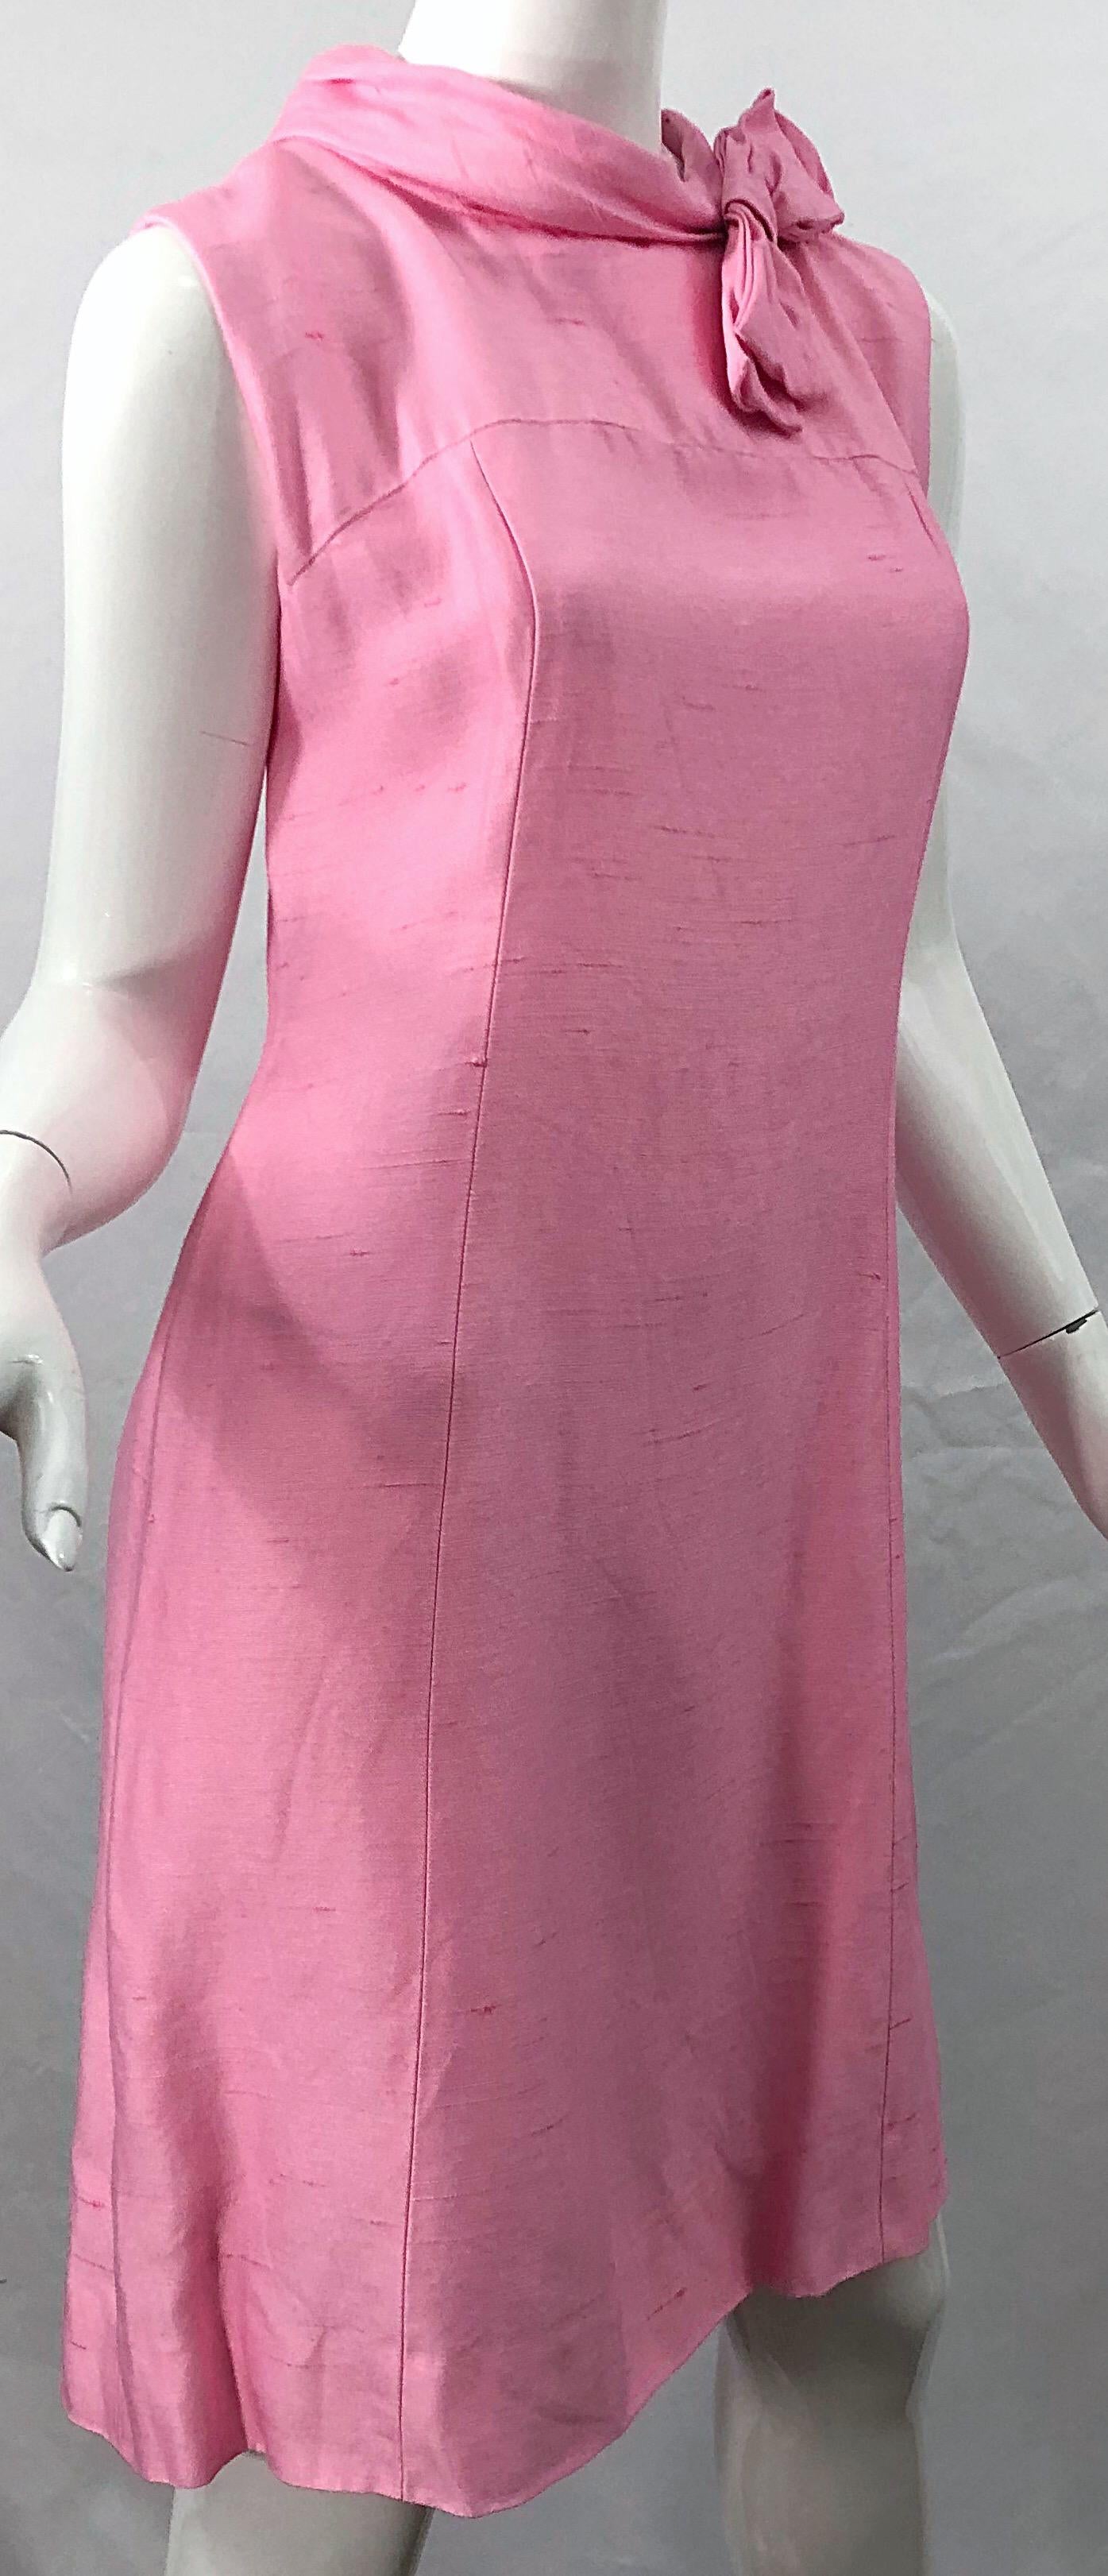 Chic 1960s Bubblegum Pink Jackie O Style Vintage 60s Raw Silk Bow Dress In Excellent Condition For Sale In San Diego, CA